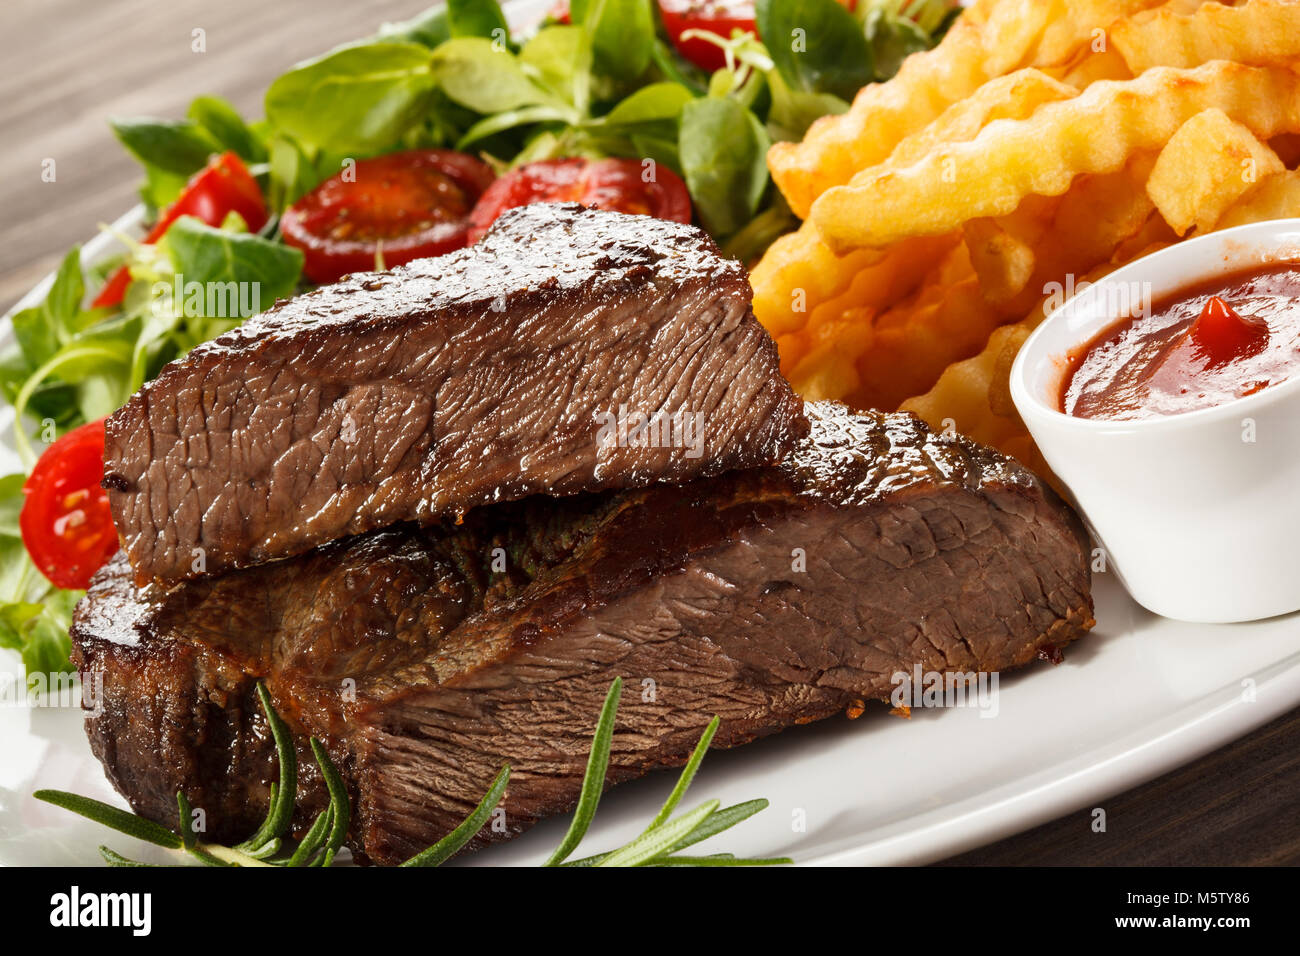 Grilled steak, French fries and vegetables on wooden background Stock Photo